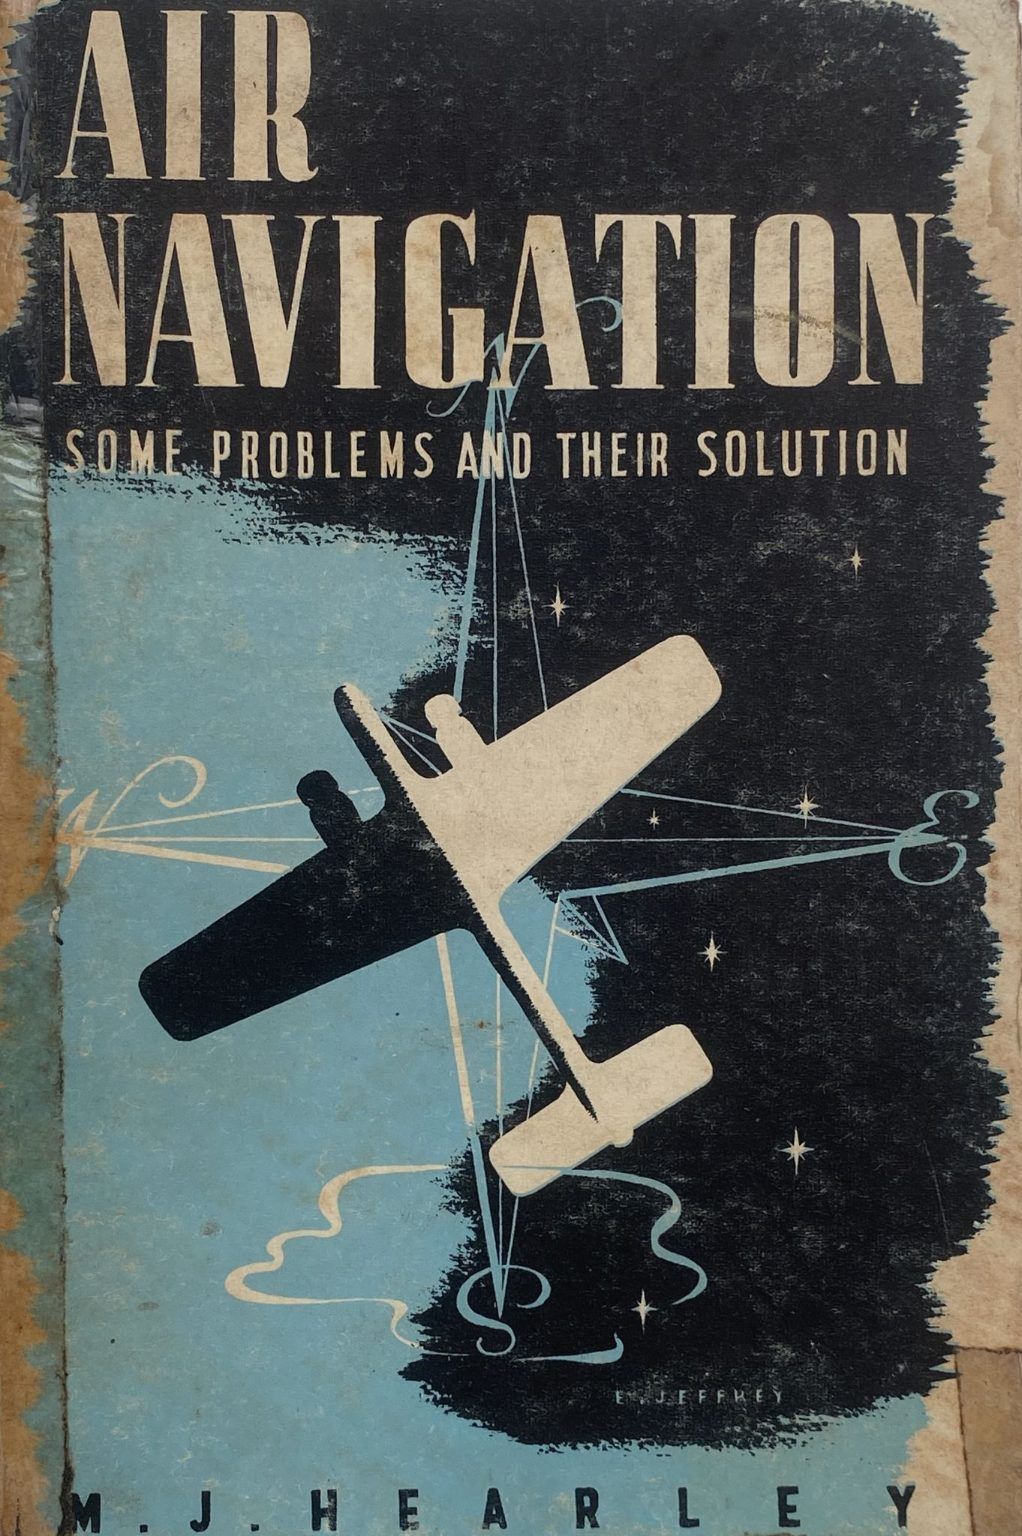 AIR NAVIGATION: Some Problems and Their Solution